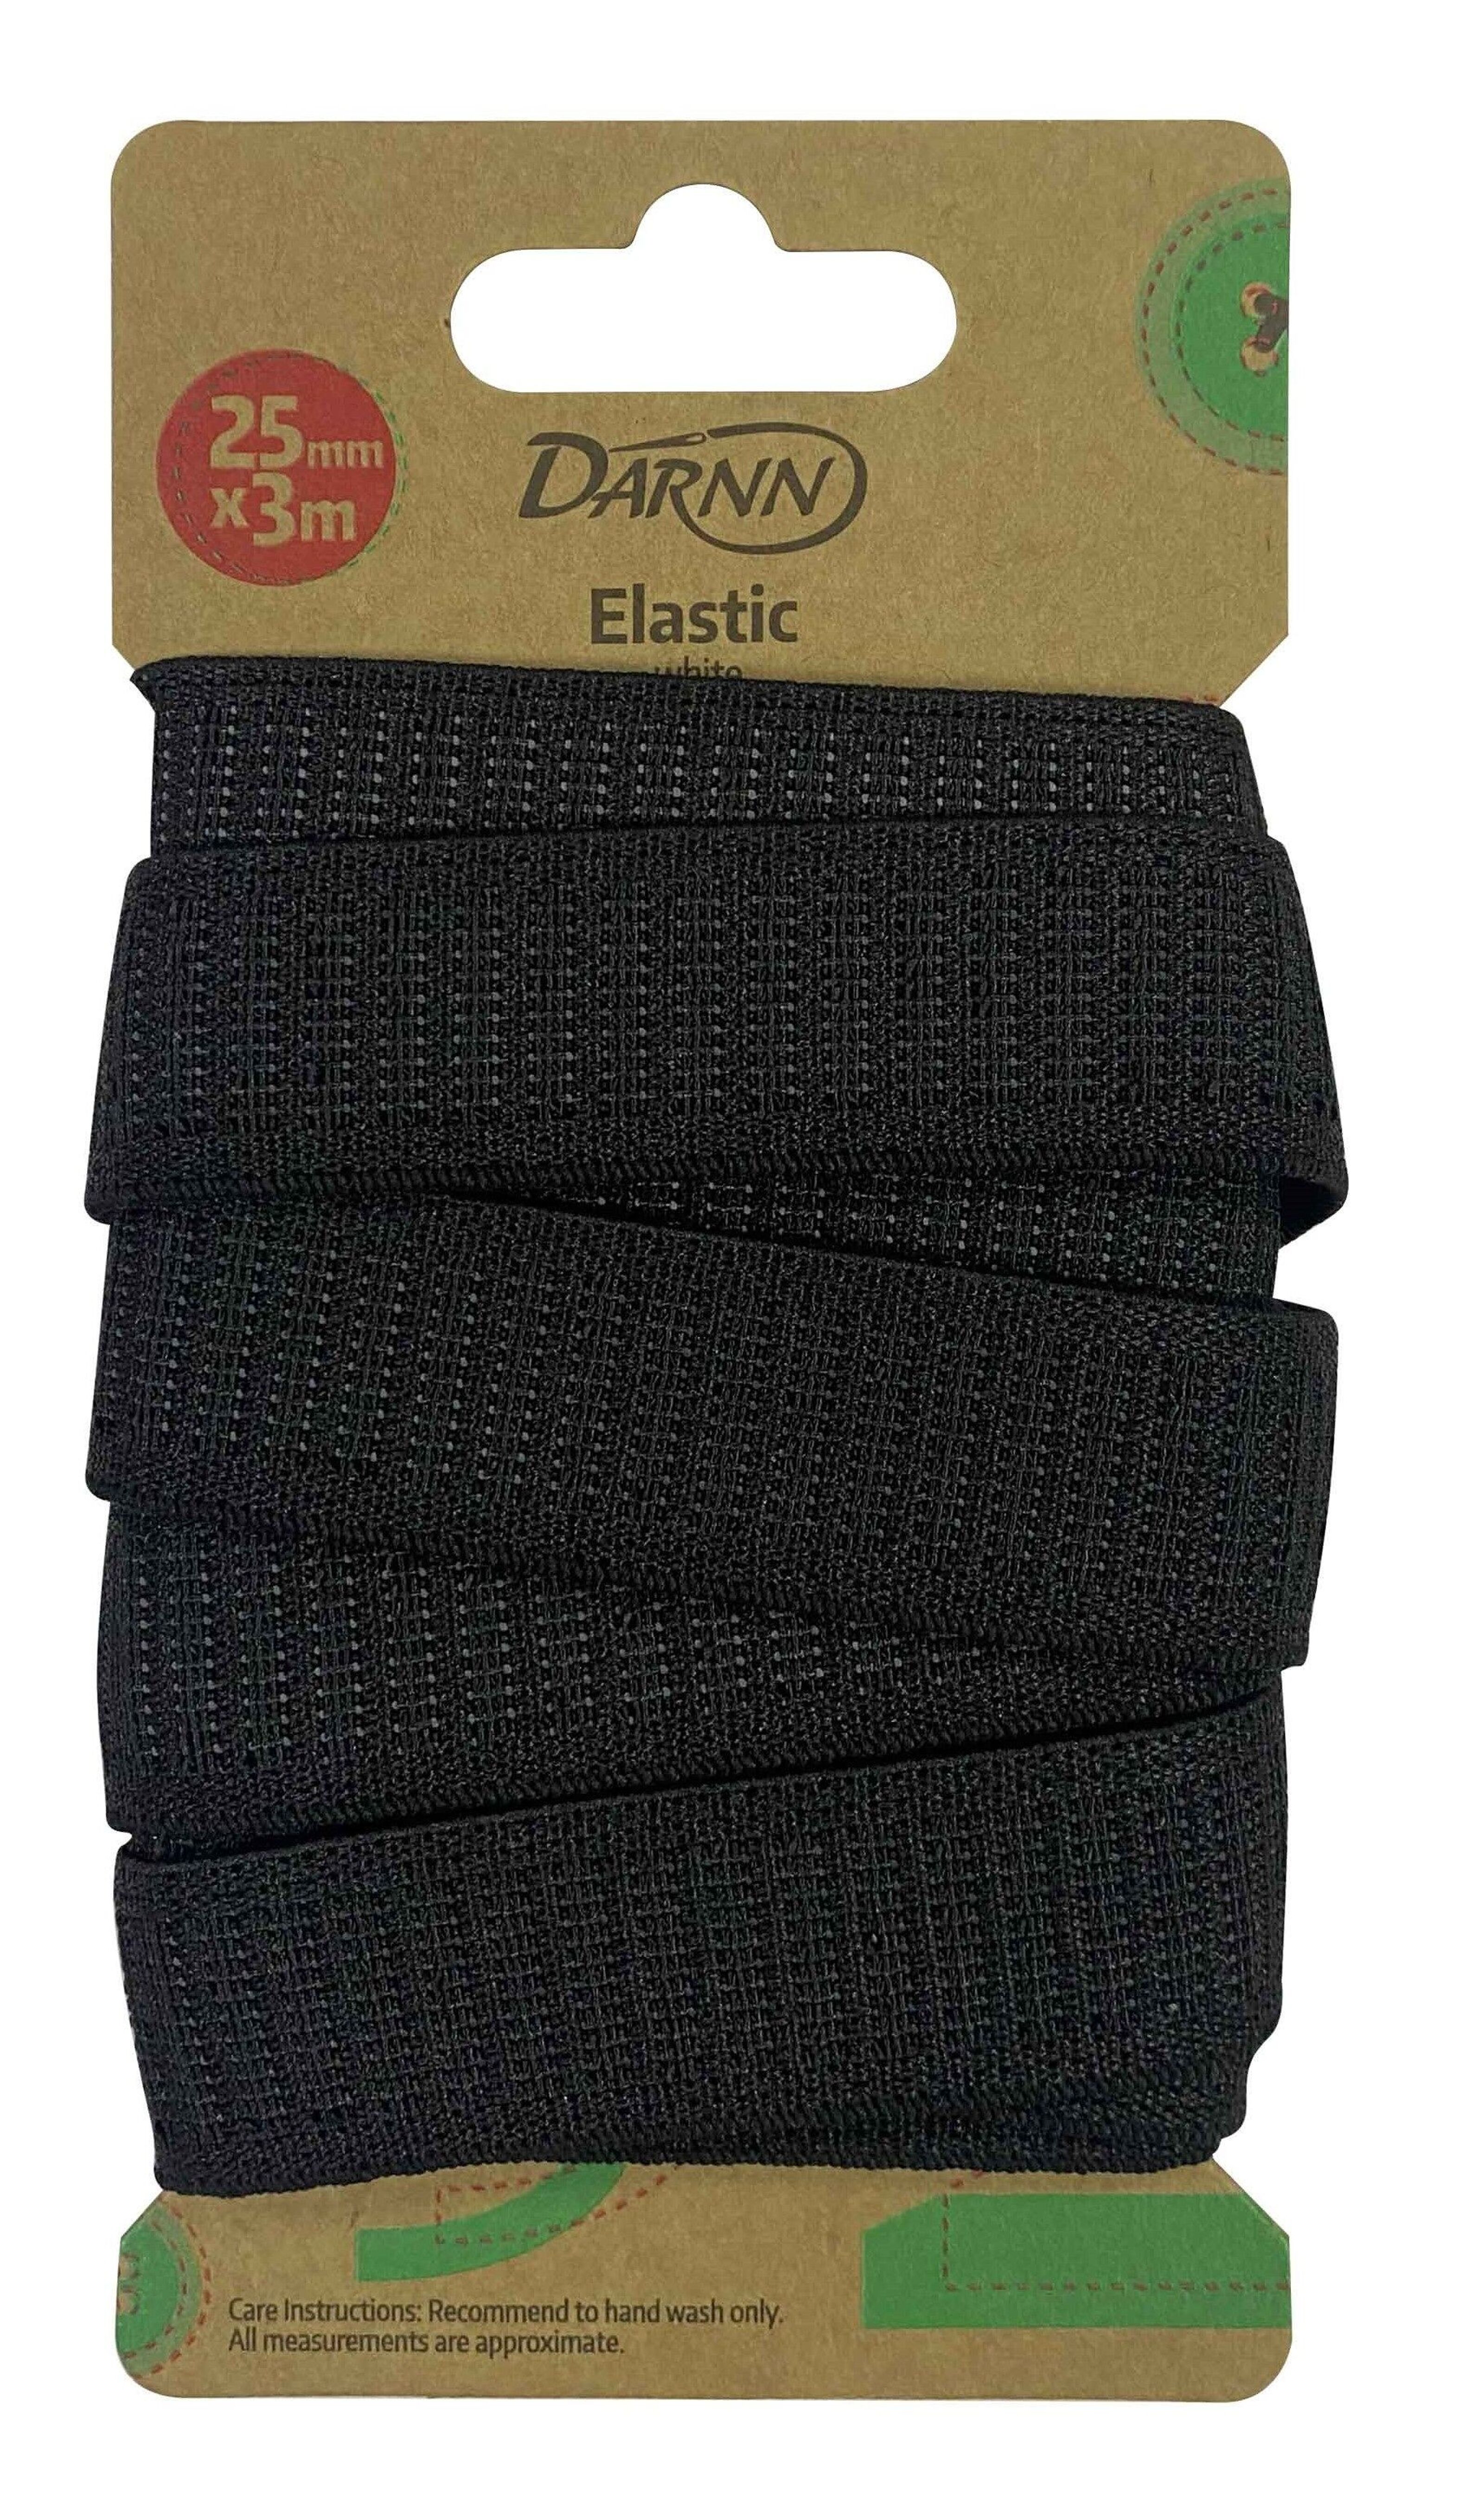 Premium Quality Flat 1 Inch Elastic 25mm Wide Width Black/White Assorted  Lengths